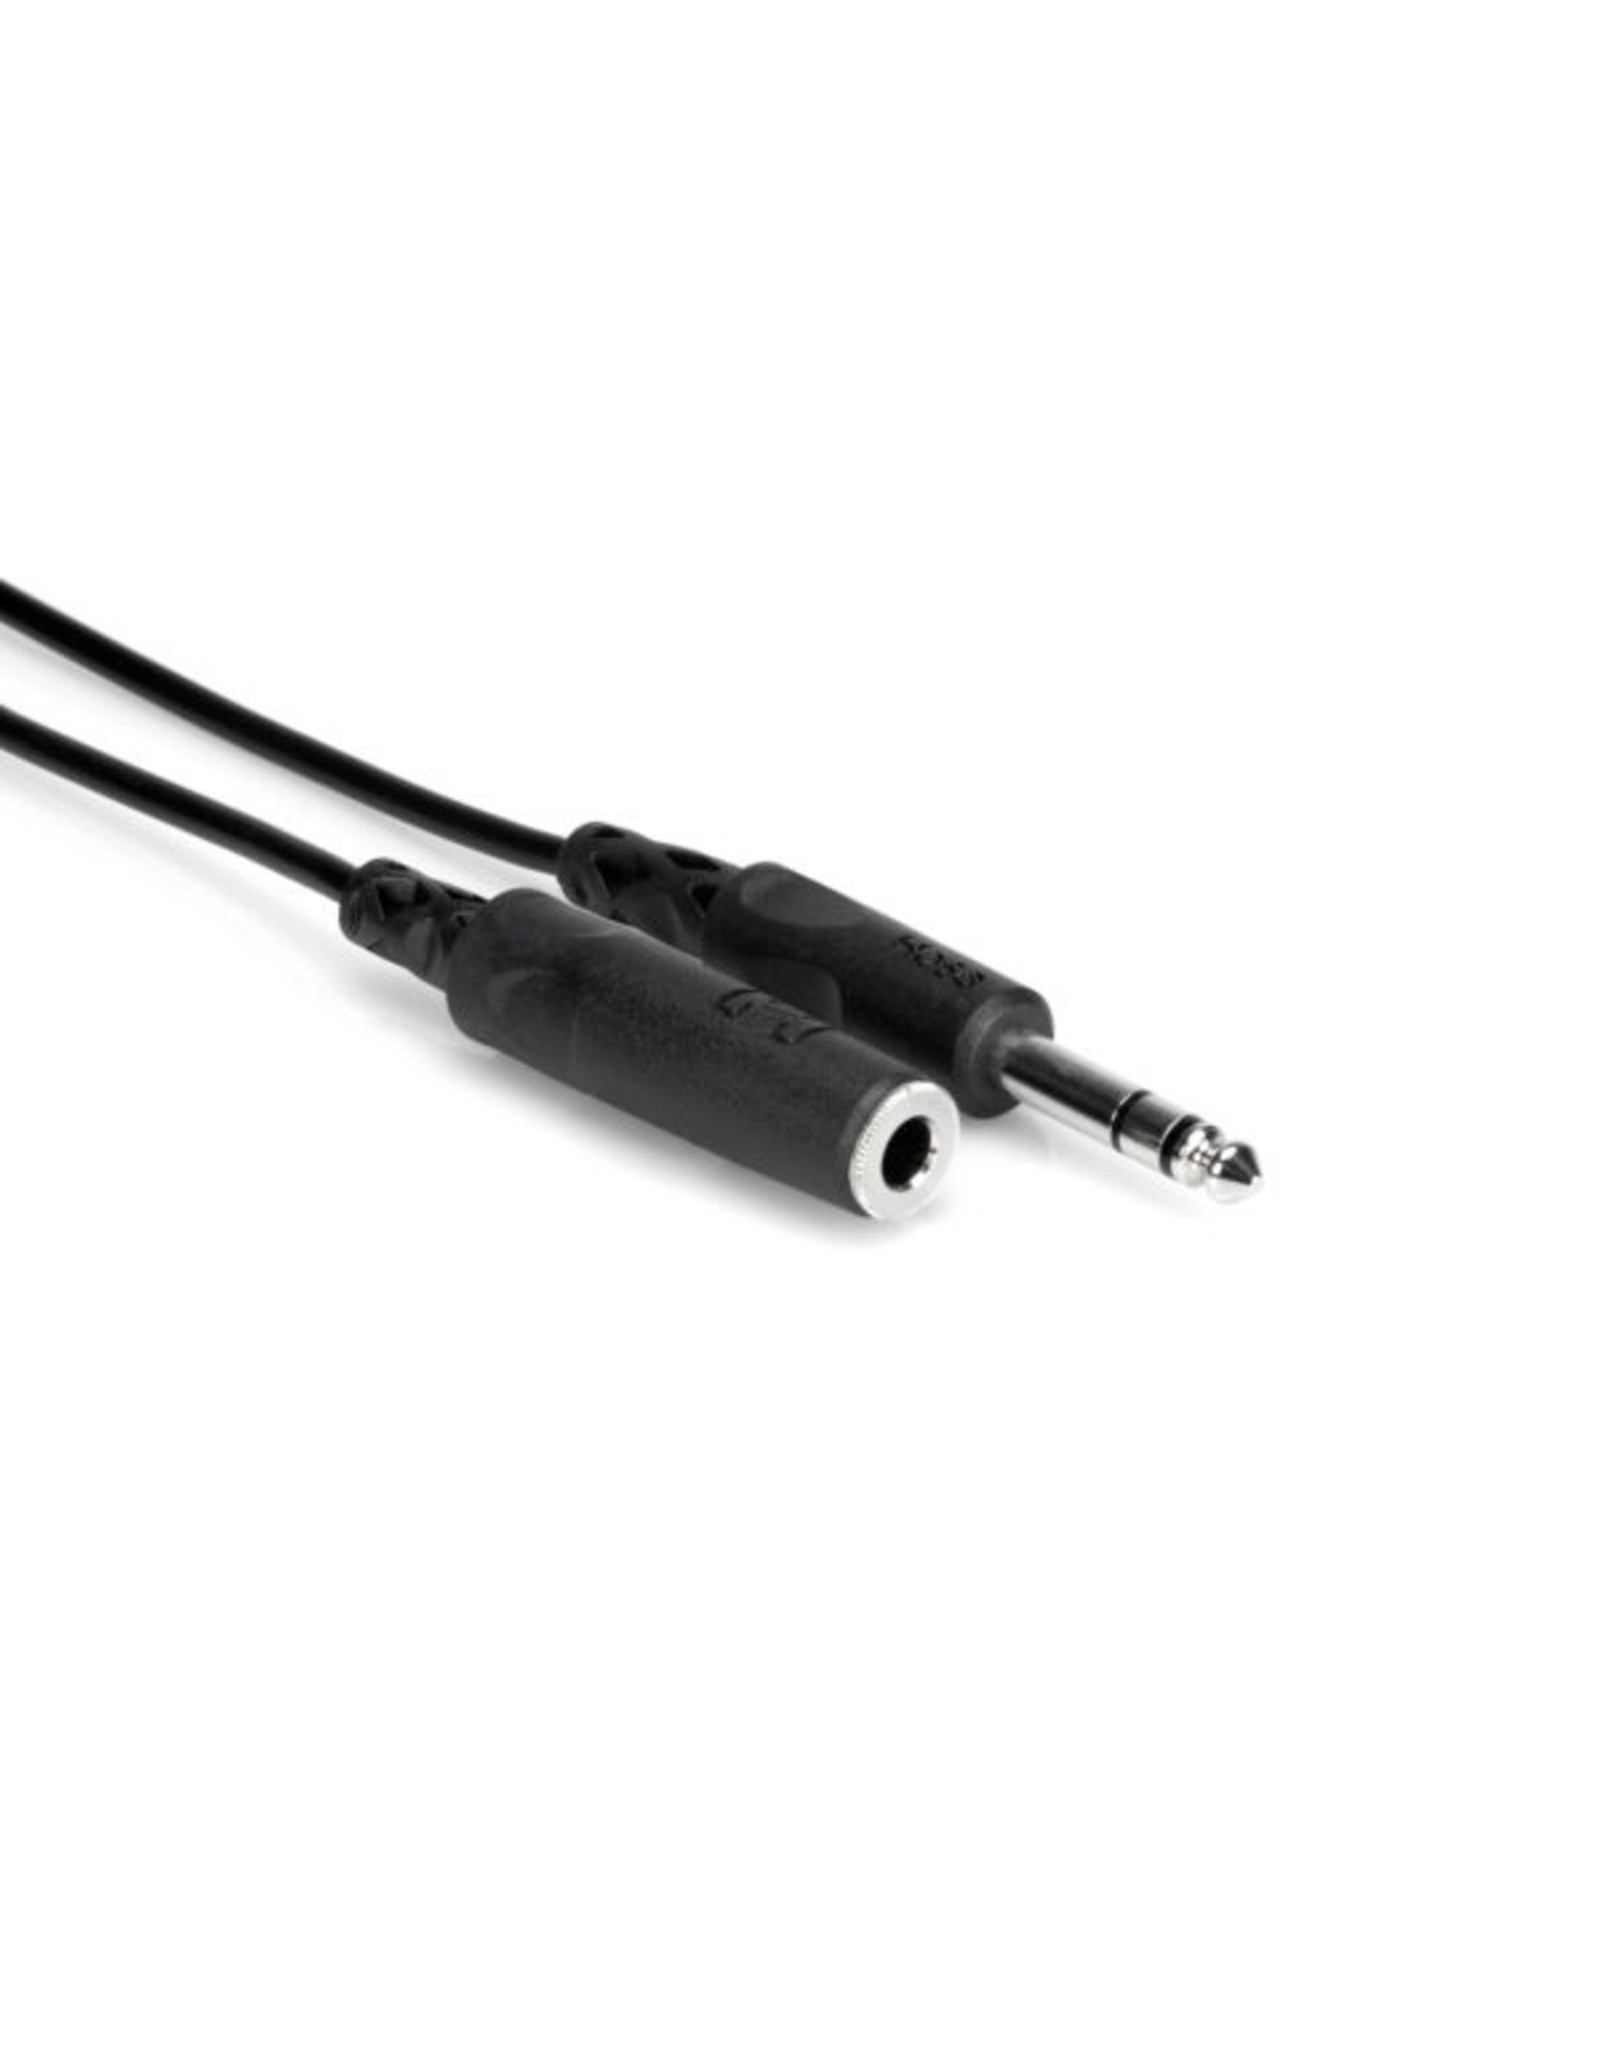 Hosa Hosa Headphone Extension Cable, 1/4 in TRS to 1/4 in TRS, 10 ft